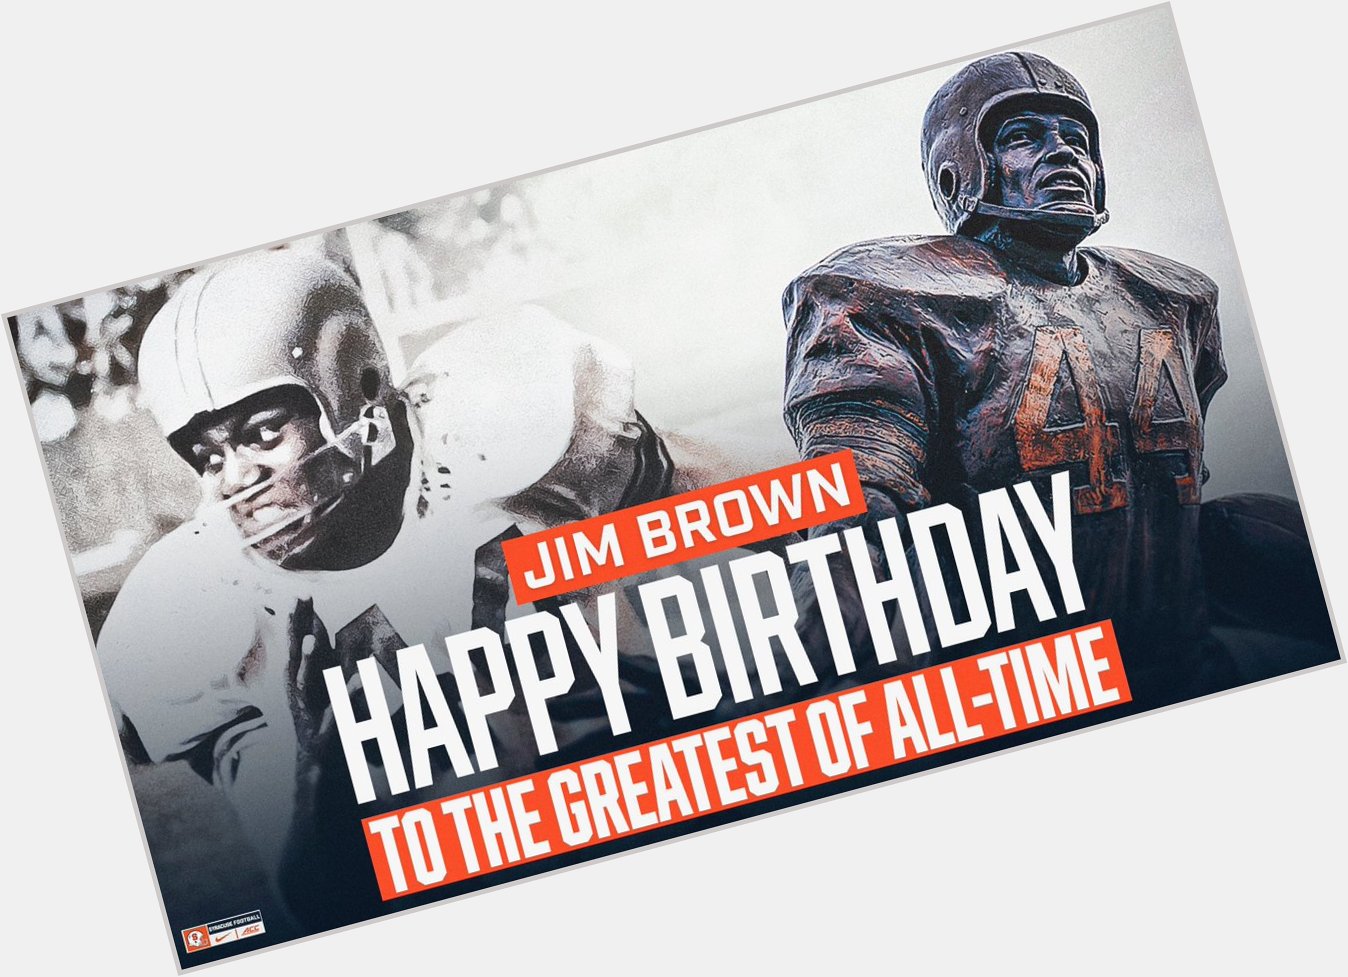 Happy belated birthday to the greatest running back ever and the Jim Brown! 